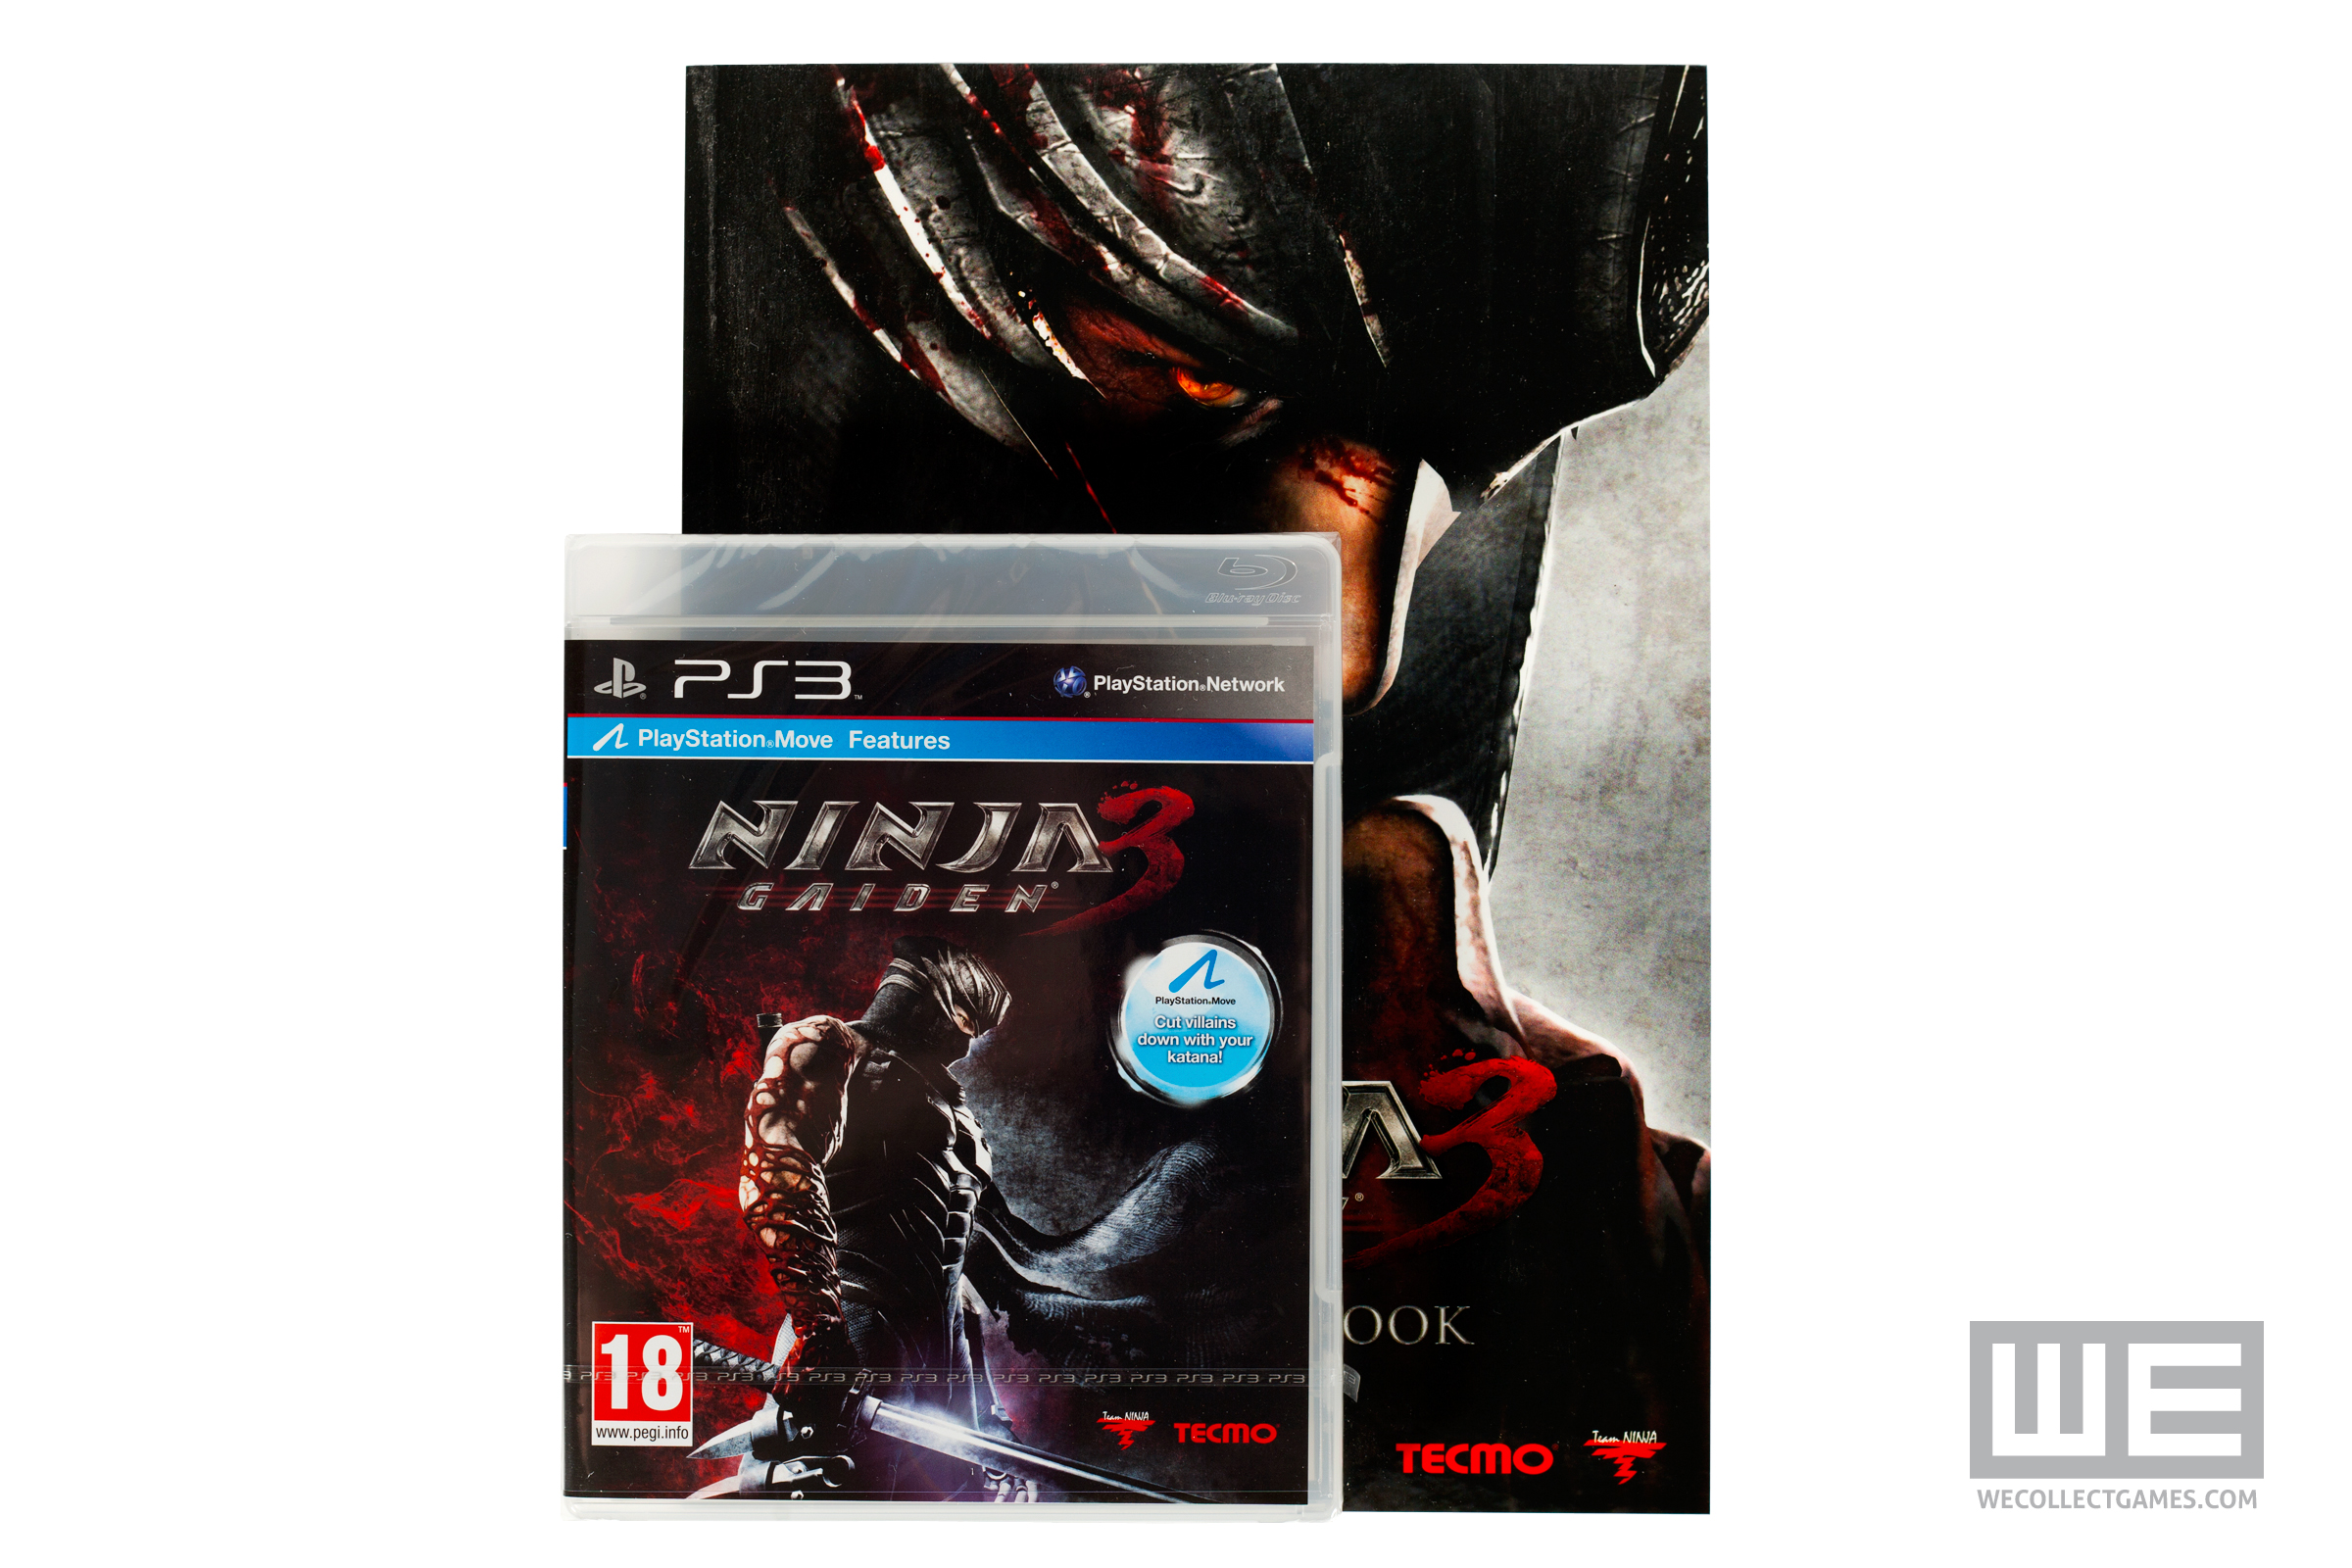 Ninja Gaiden Collector's Edition WE collect games